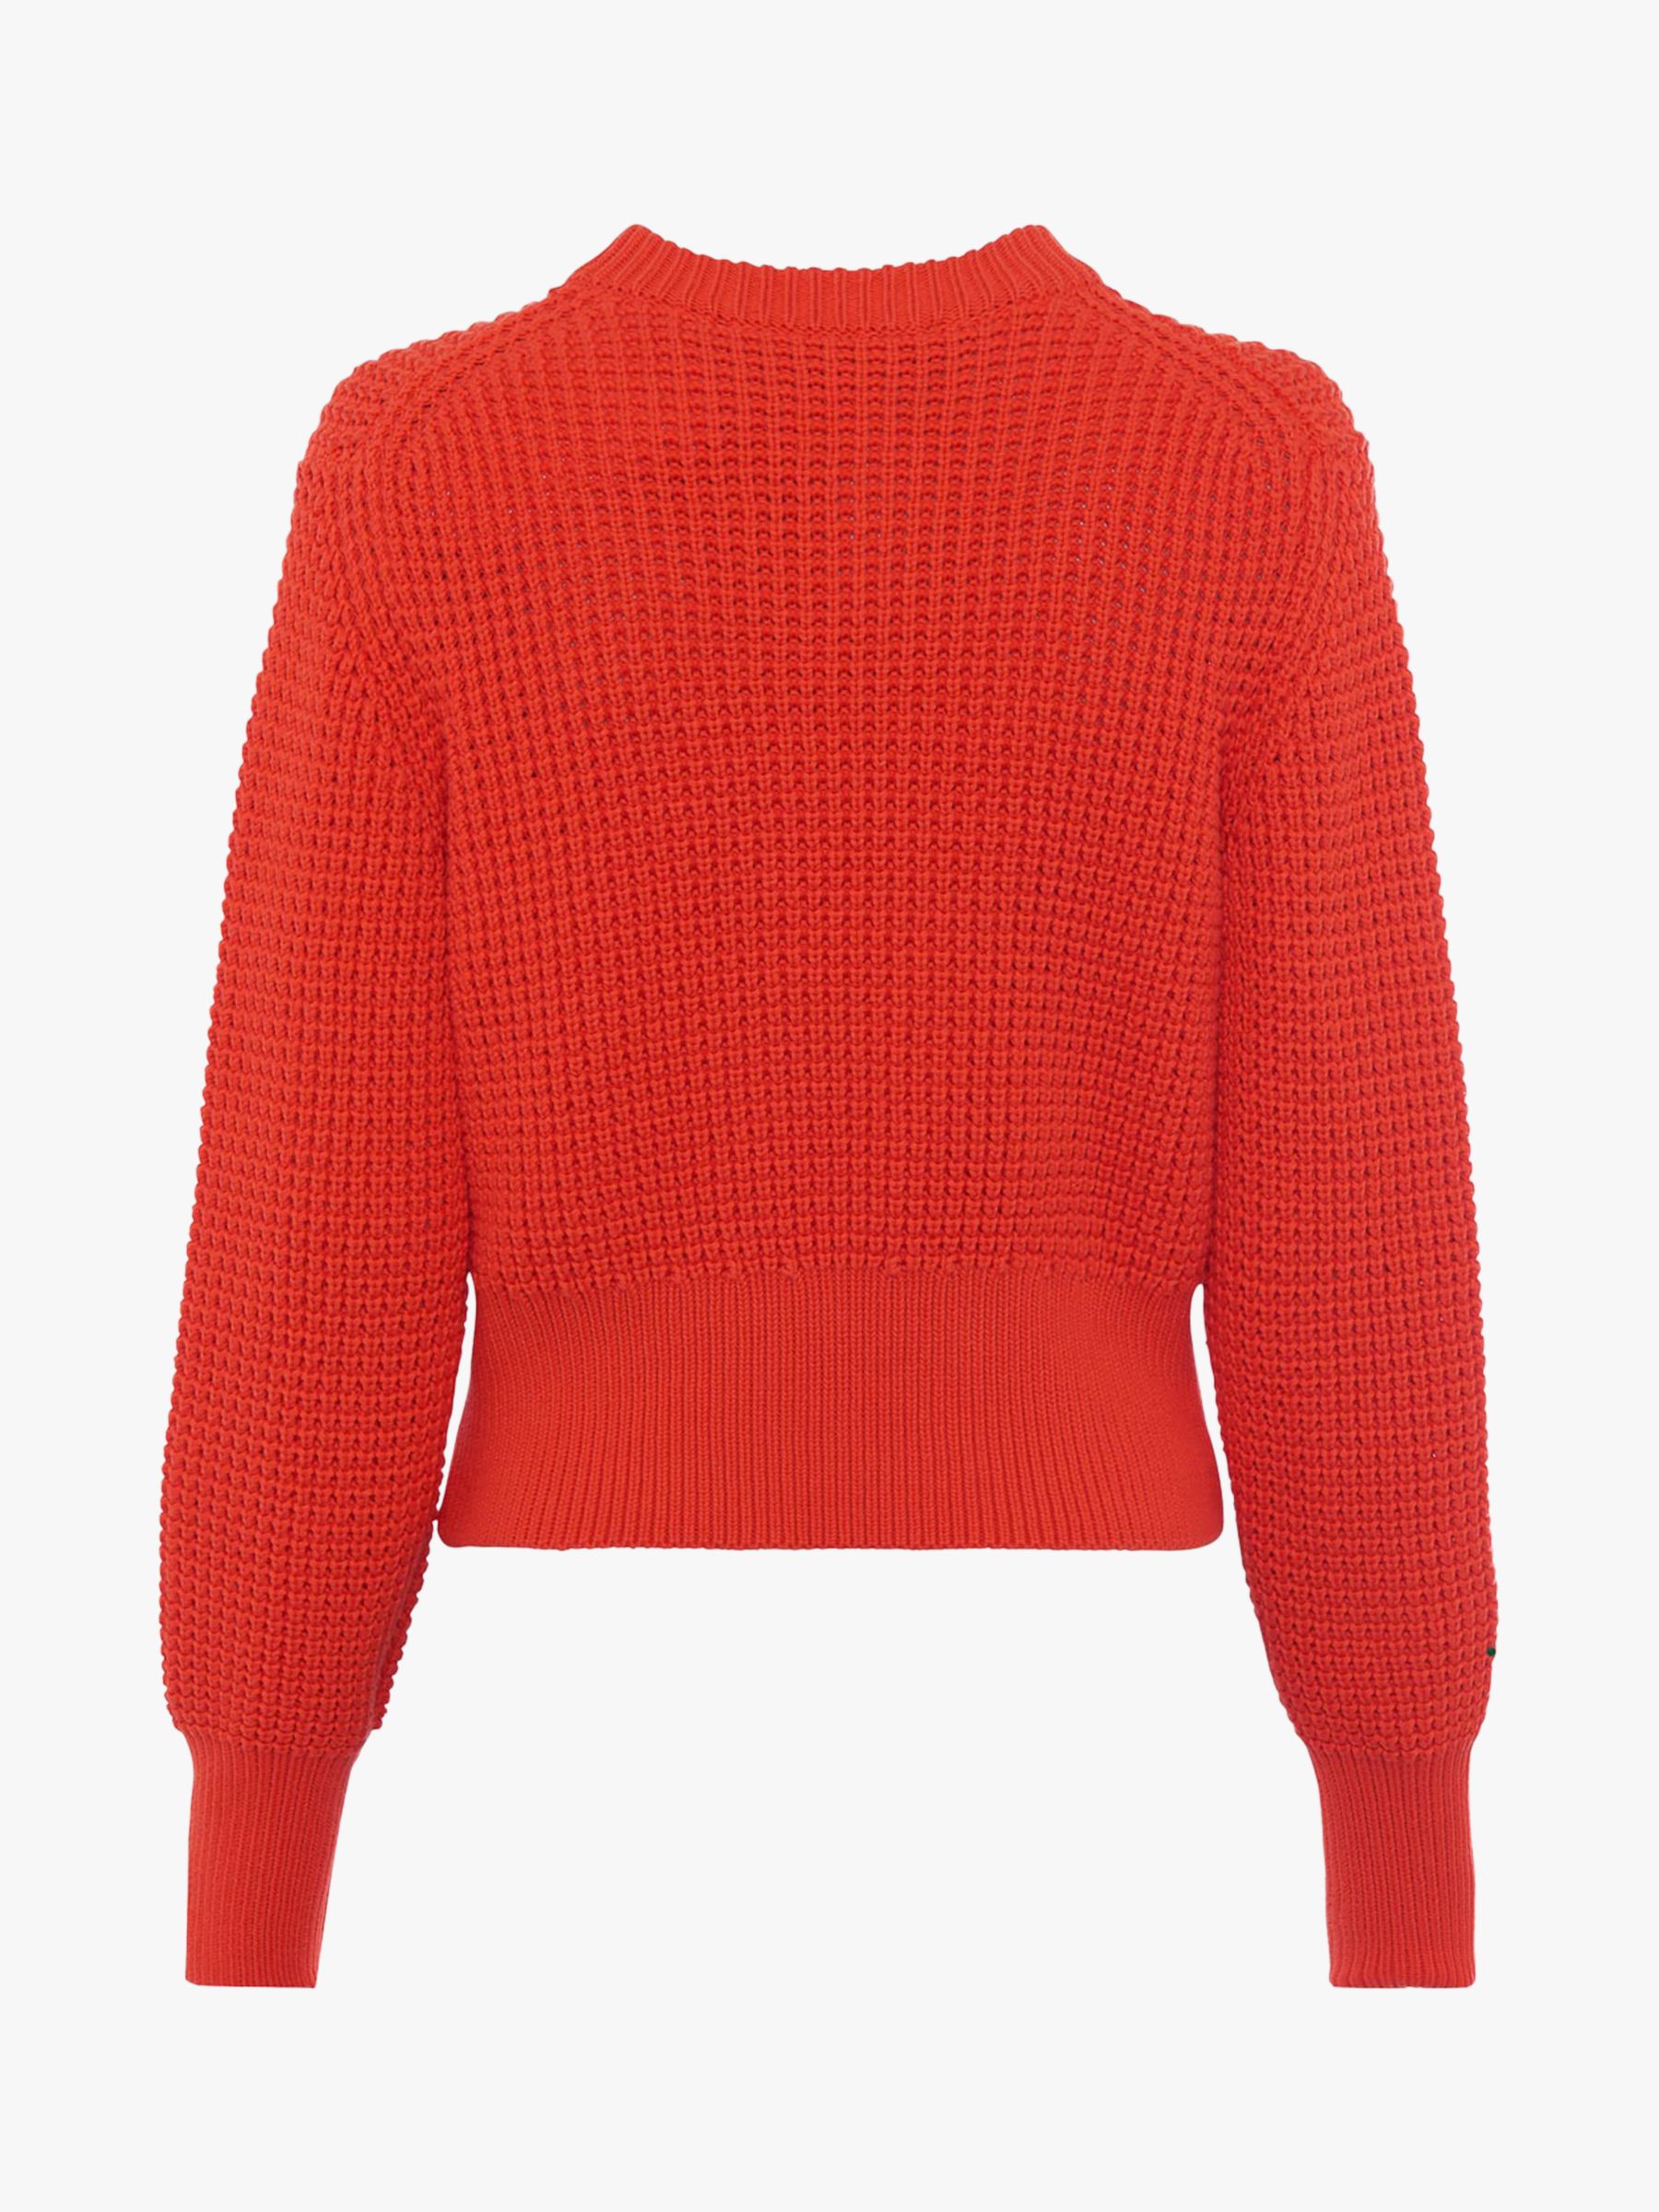 French Connection Luna Mozart Jumper, Poppy Red